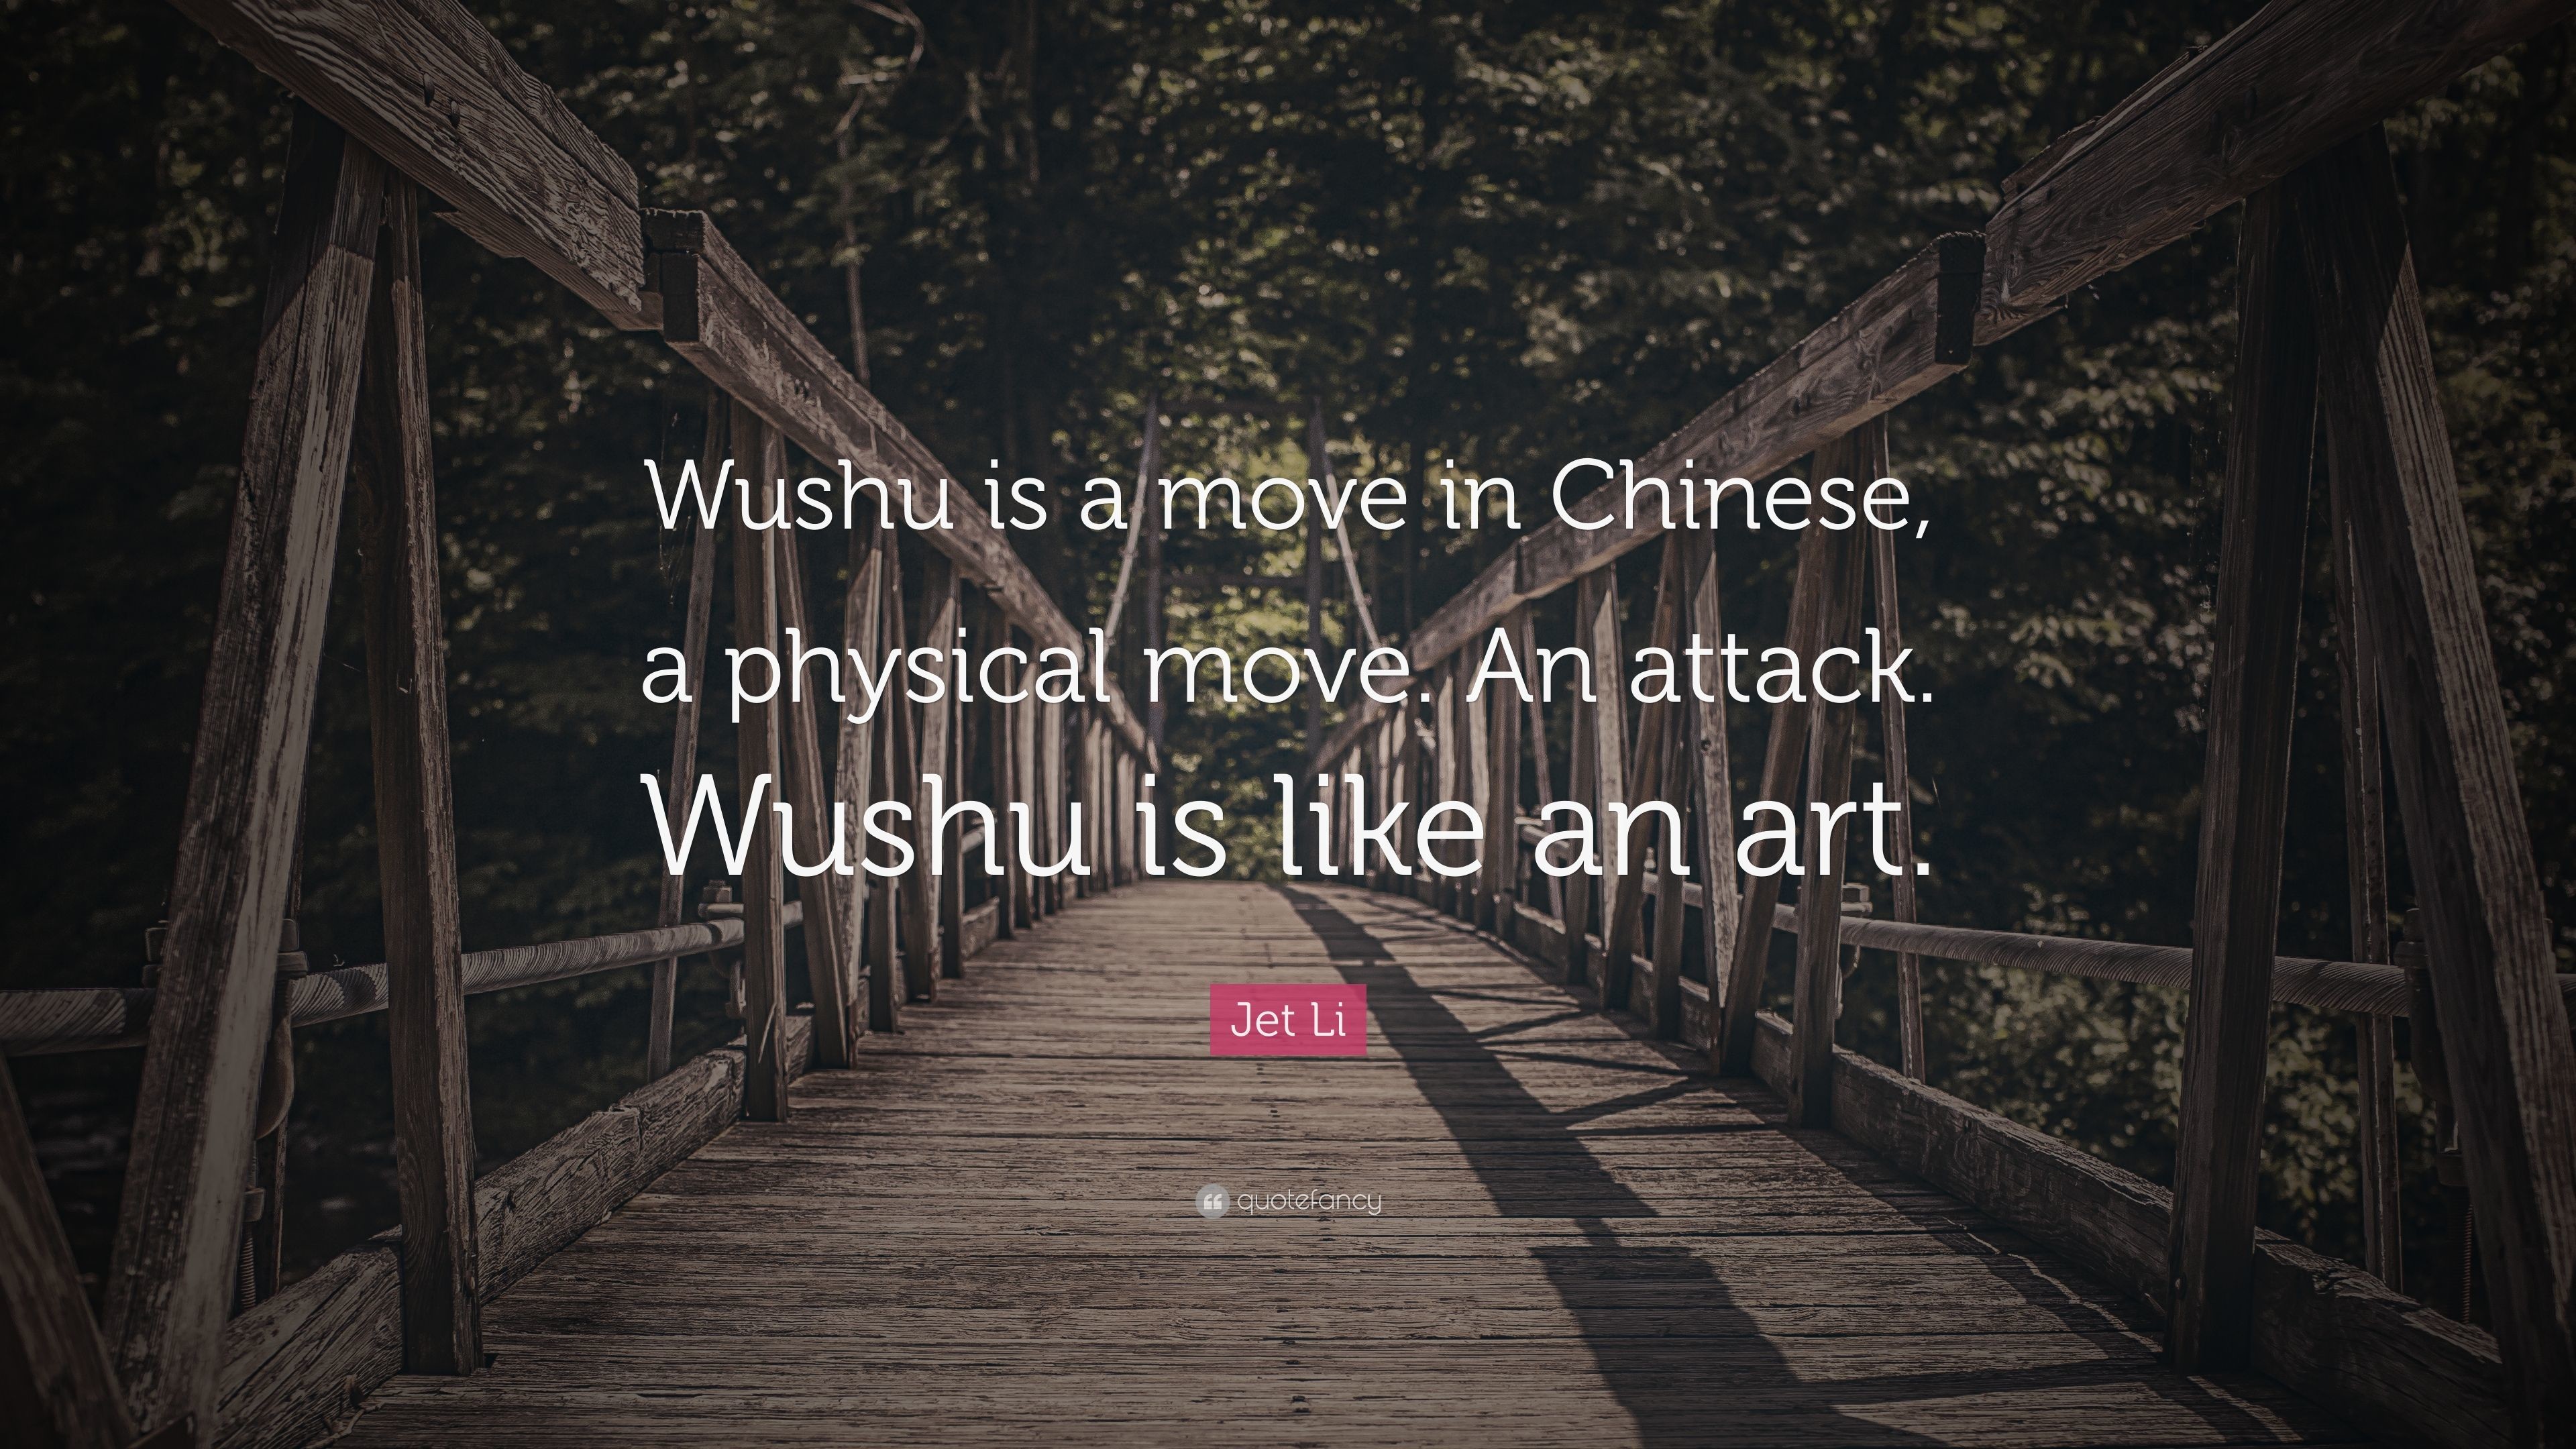 3840x2160 Jet Li Quote: “Wushu is a move in Chinese, a physical move.